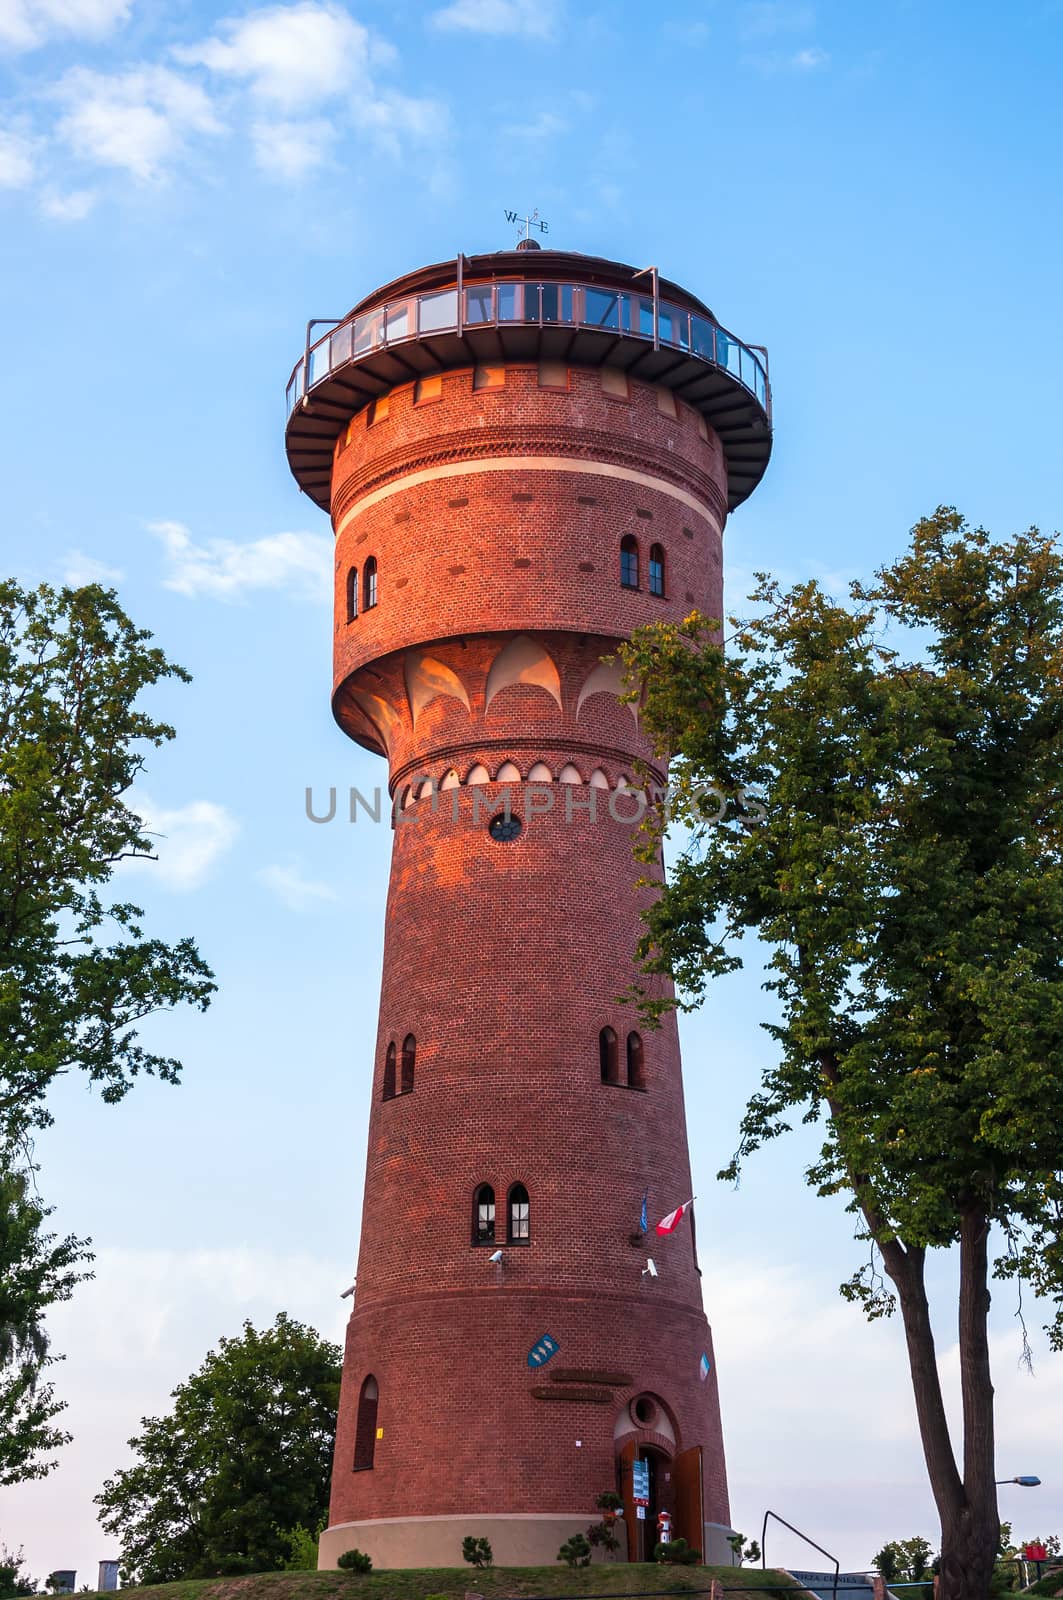 The Water Tower, Gizycko in the Masurian Lakes district of northern Poland